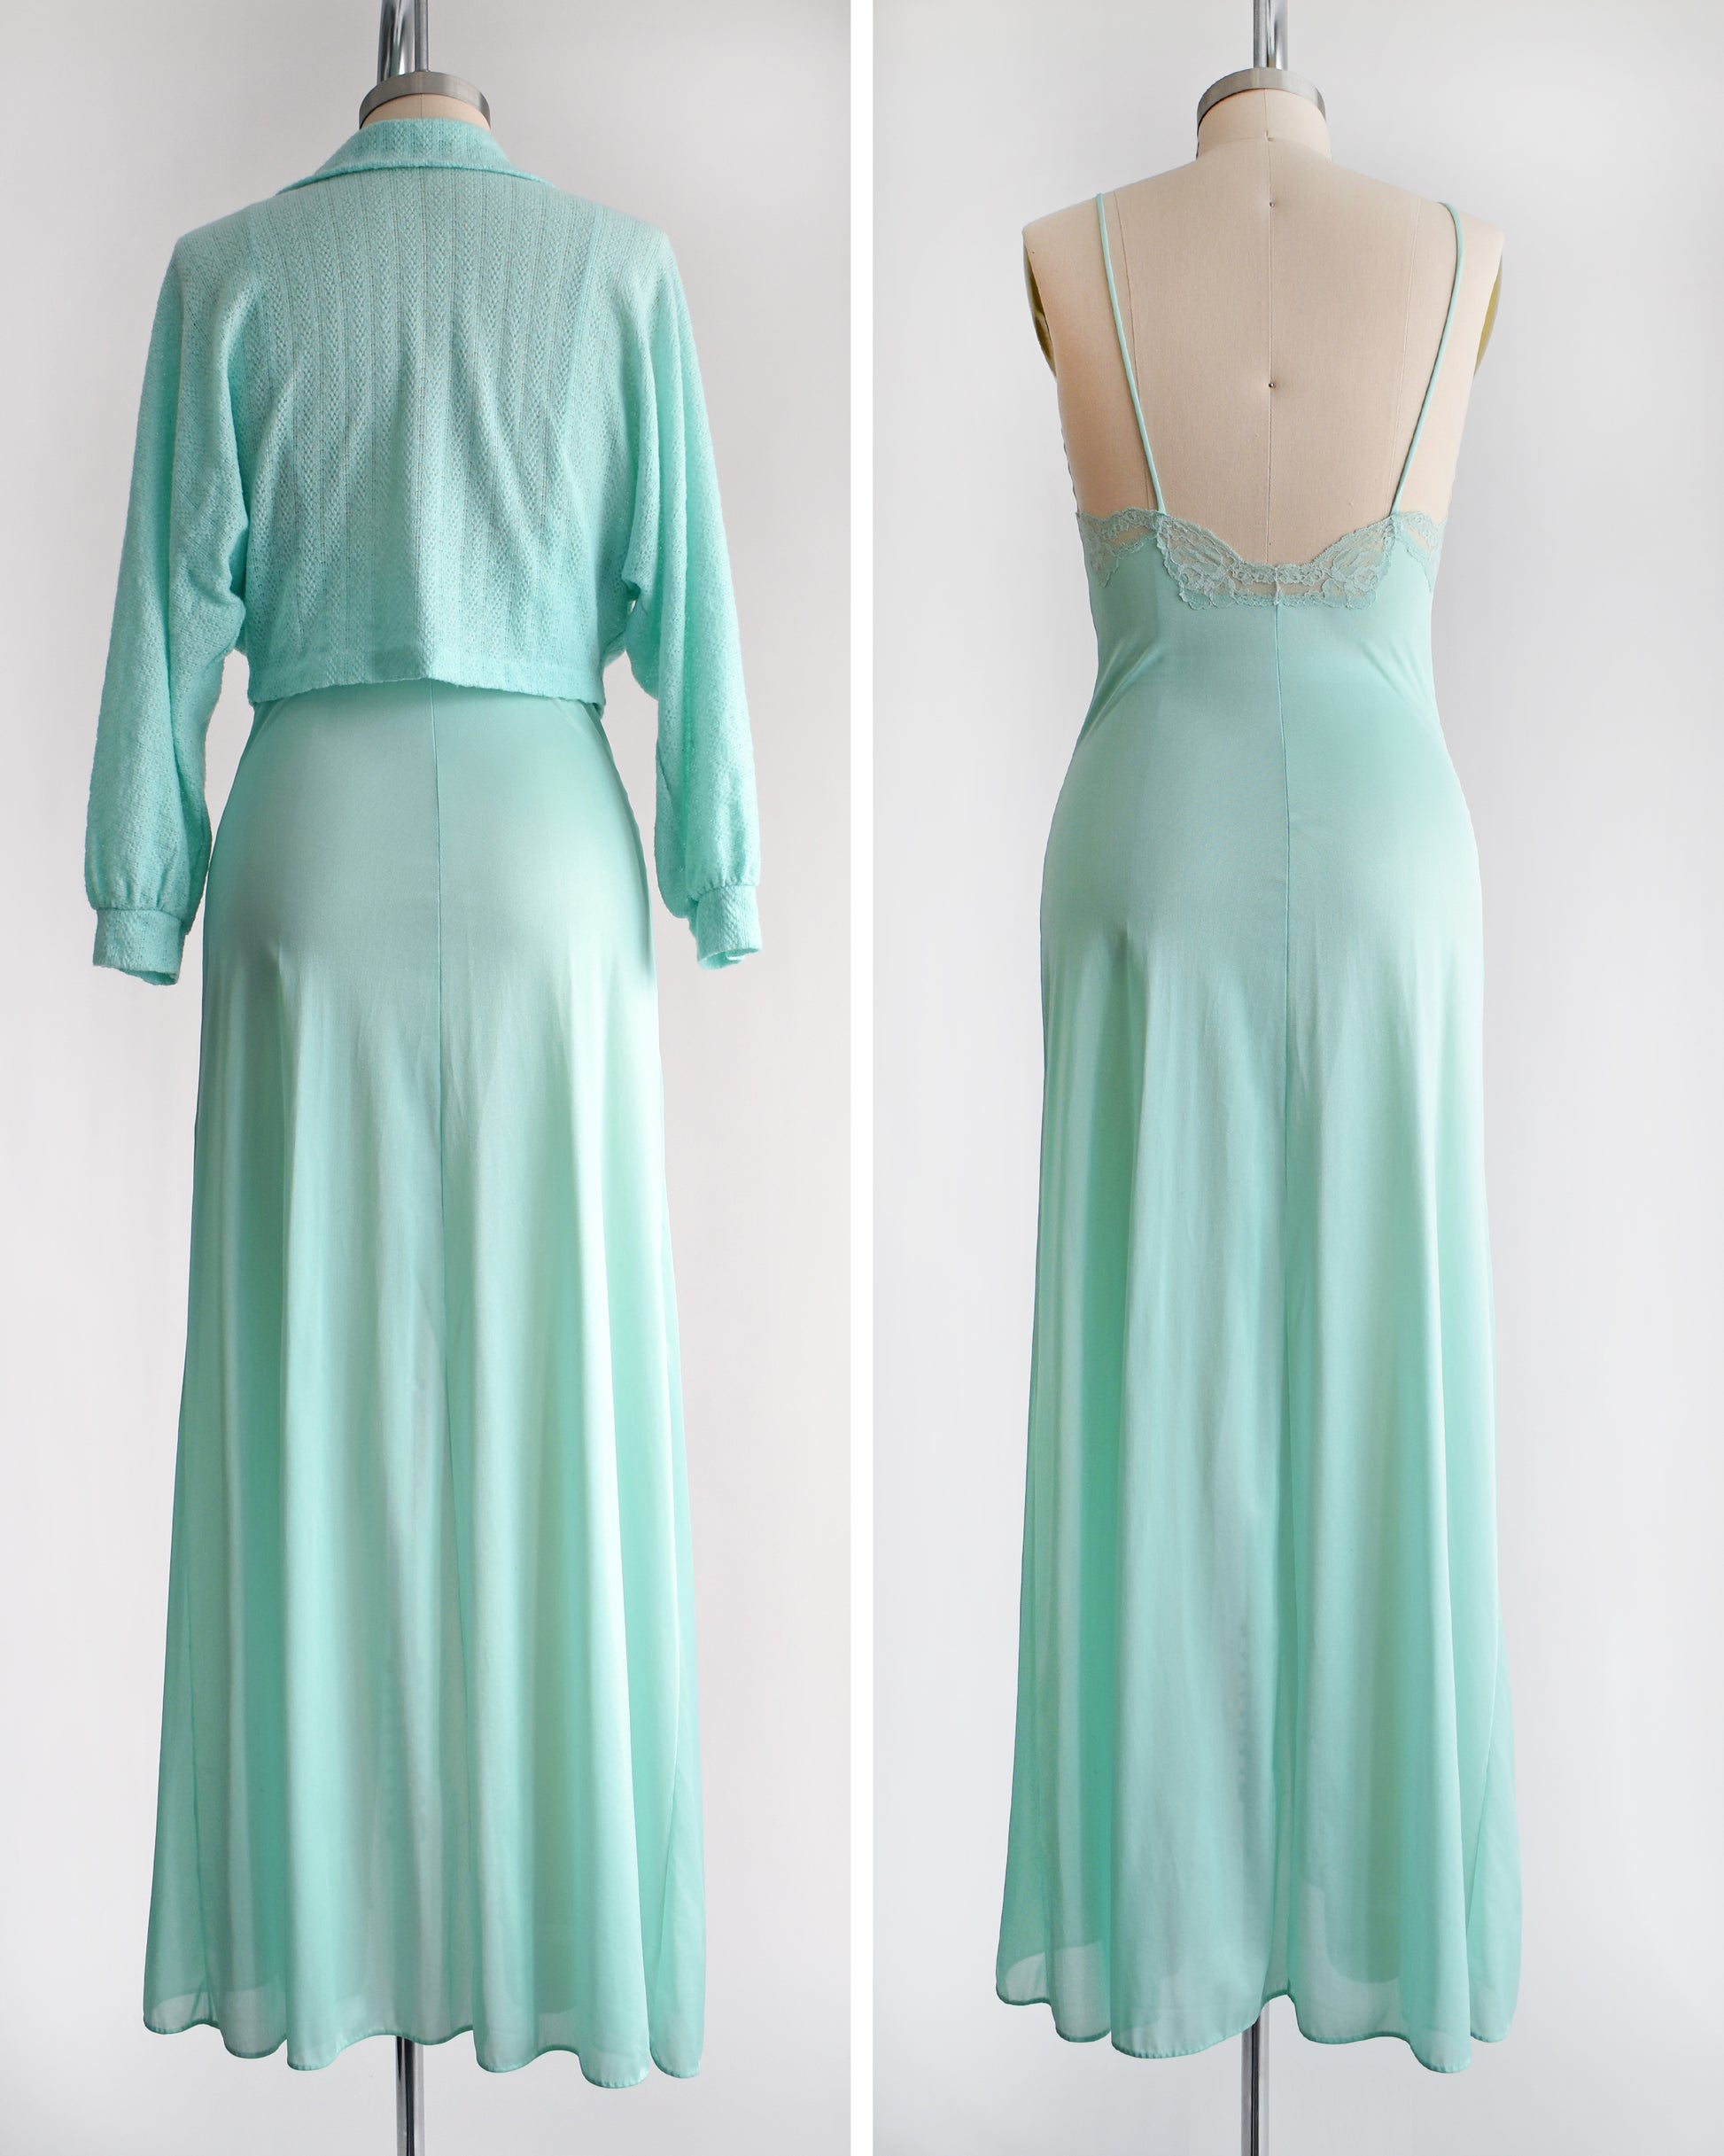 Side by side views of the back of a vintage 1970s mint green nightgown and bed jacket set. The left photo shows the bed jacket and nightgown together